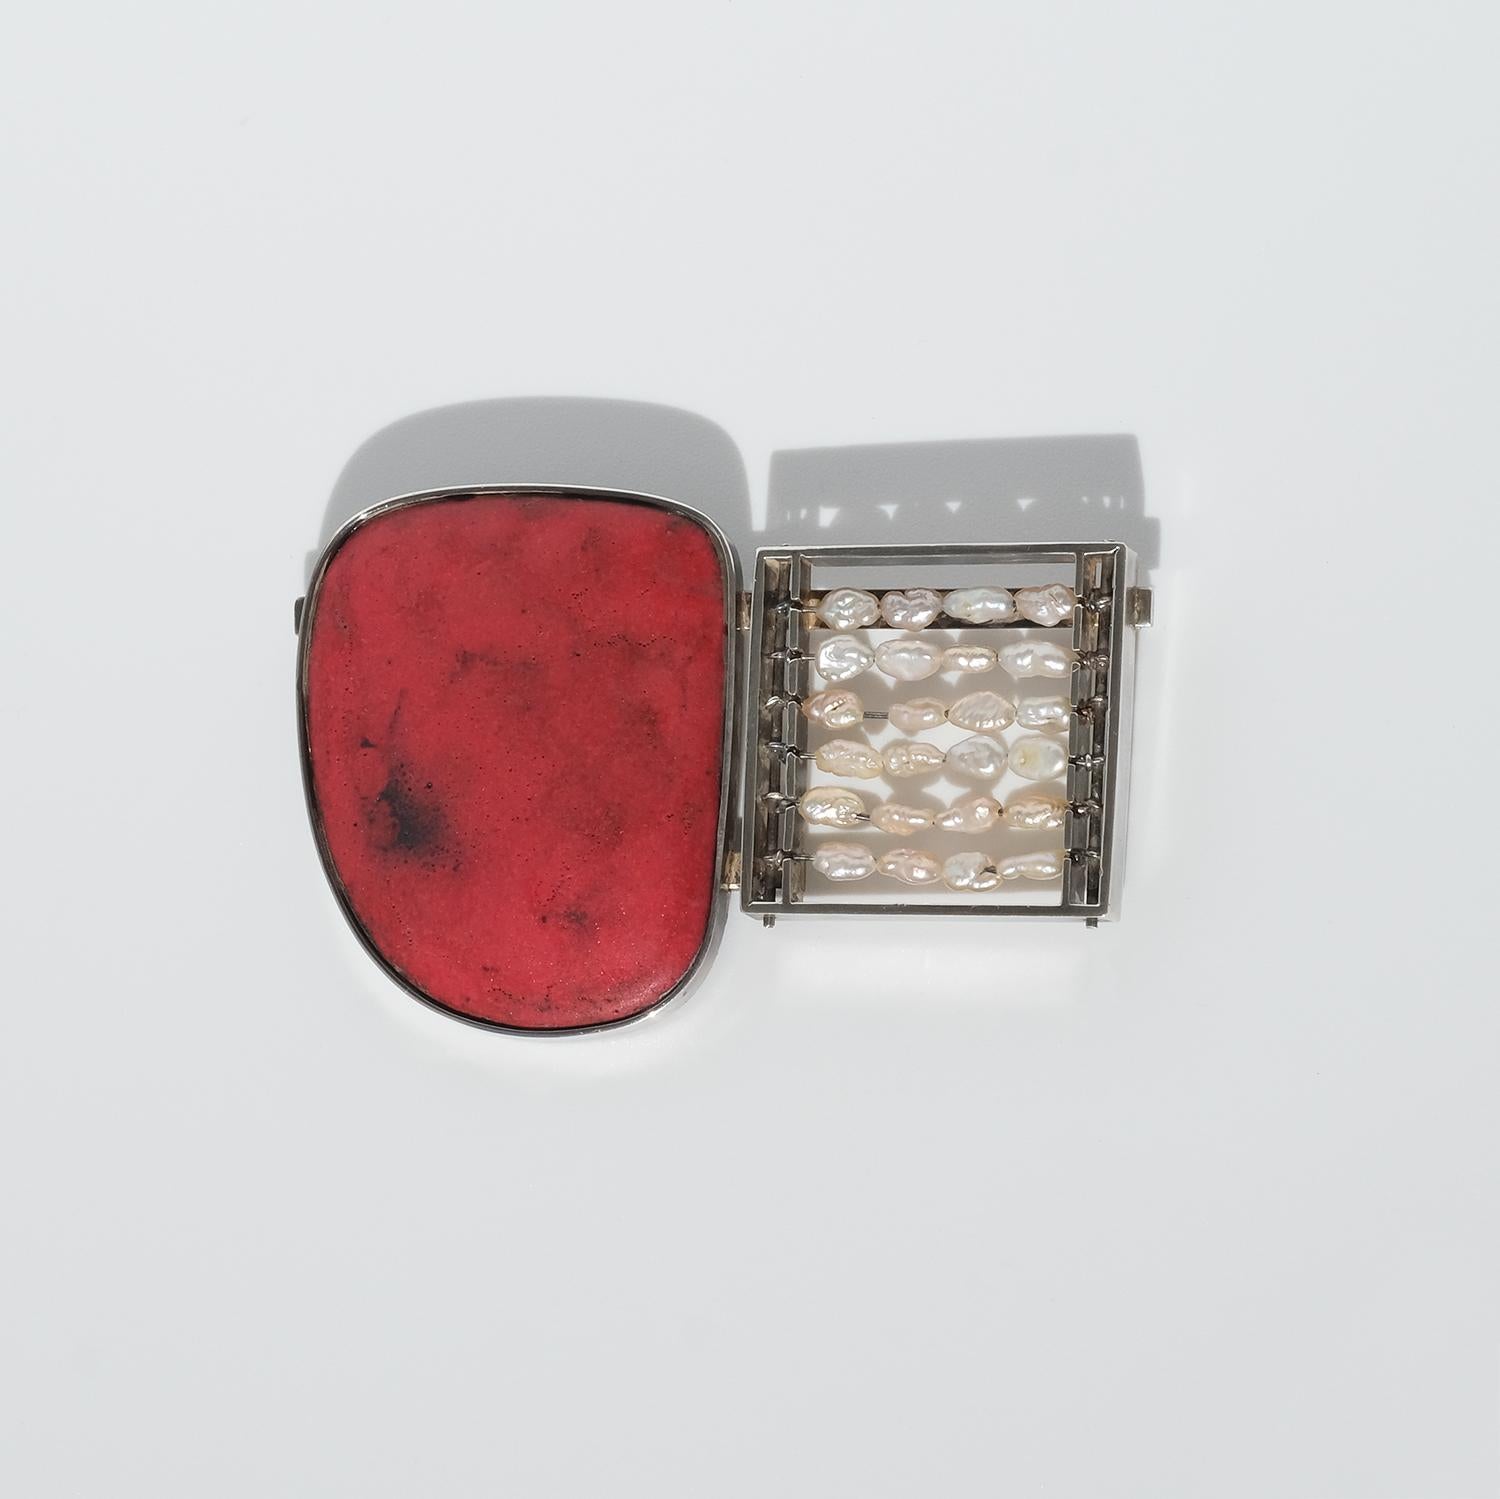 This brooch is adorned with an asymmetric red stone and a square that contains beads strung on wire.

This unusual creation is what we would call a happy item and it can easily be categorized as a conversation piece. It is a piece of art.